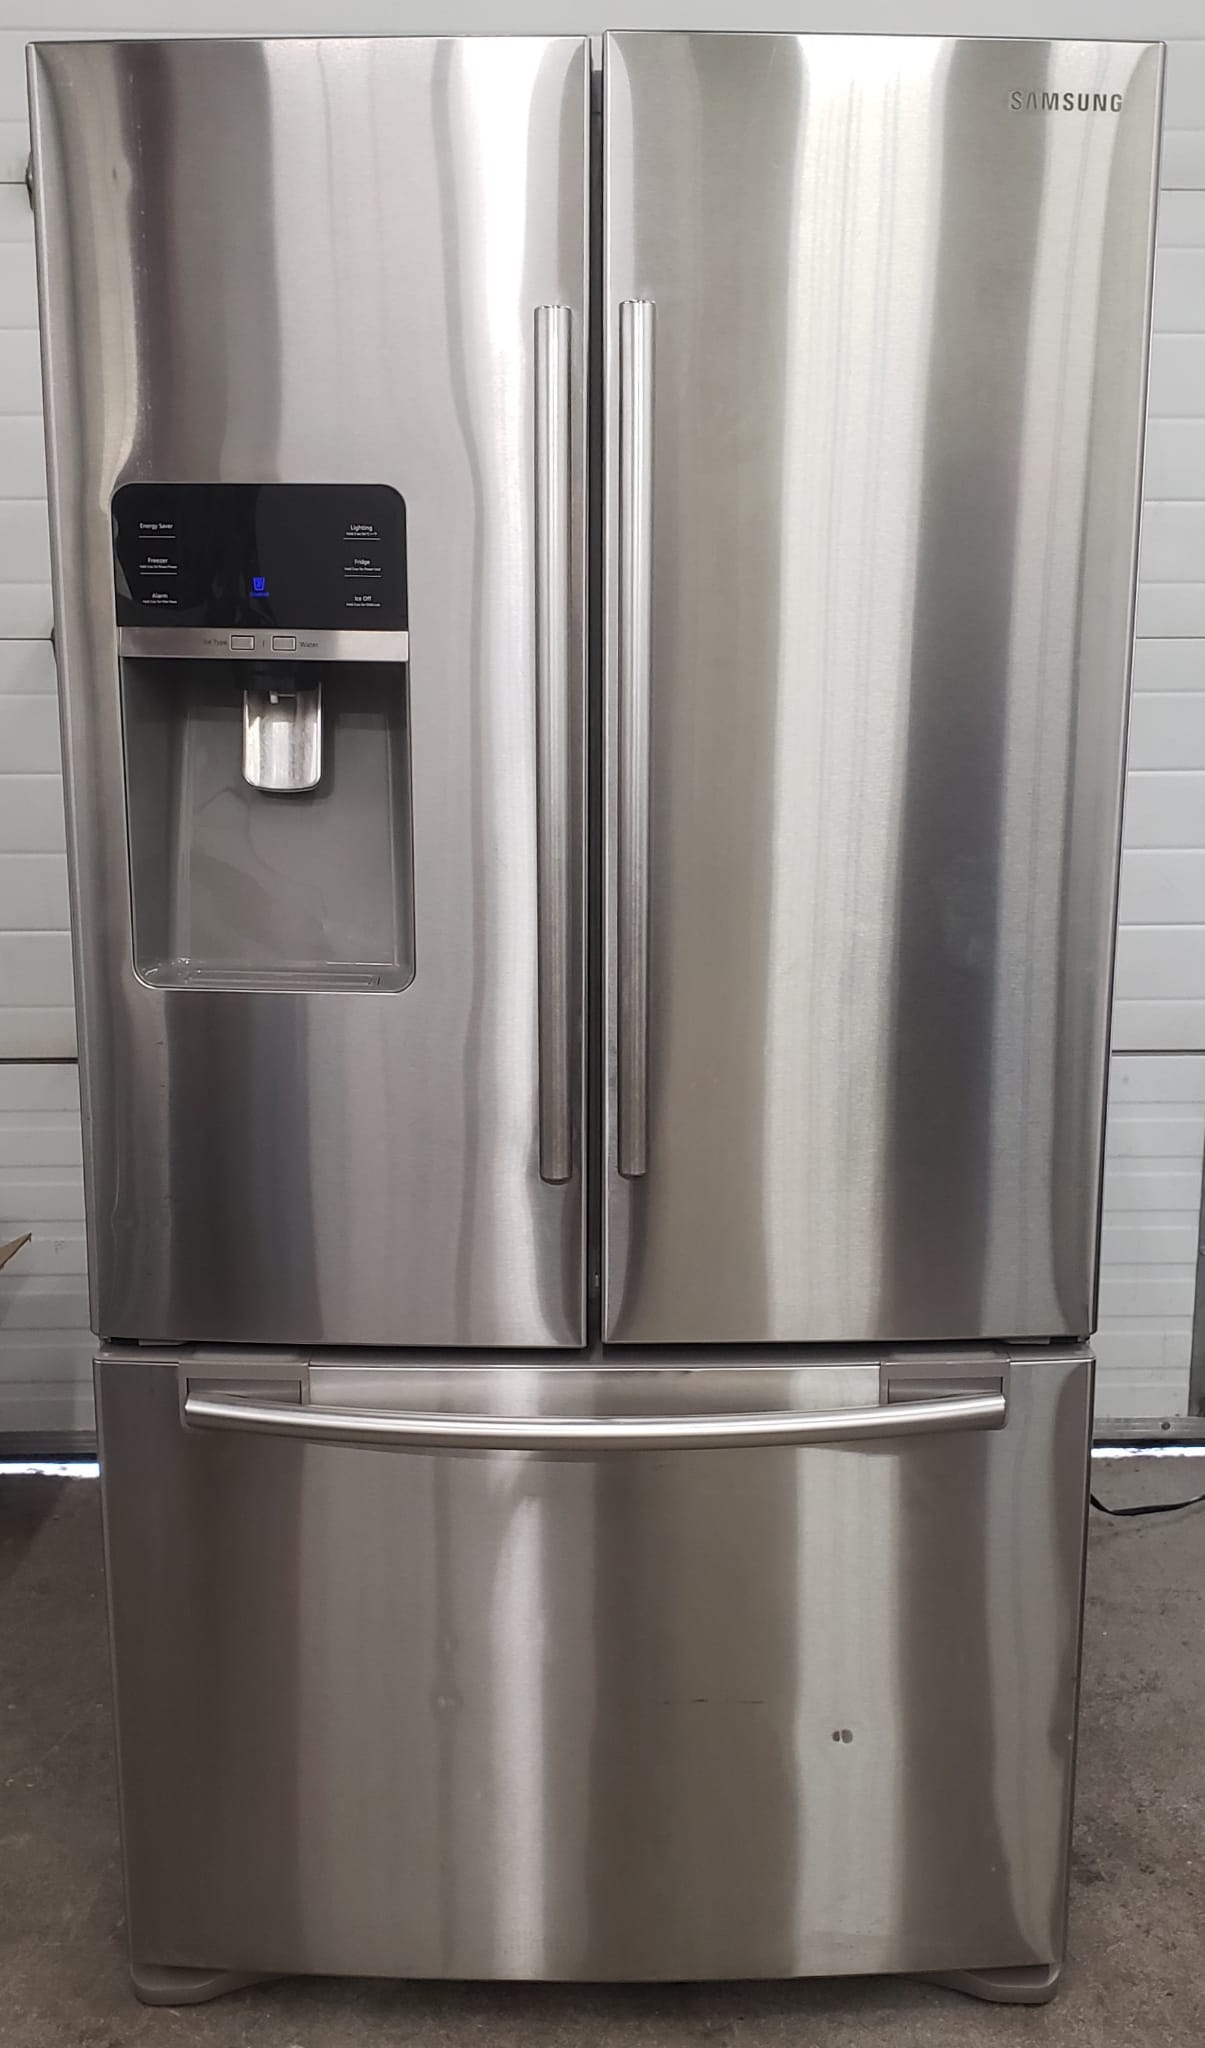 Order Your Used Refrigerator Samsung - Rfg297hdrs Today!